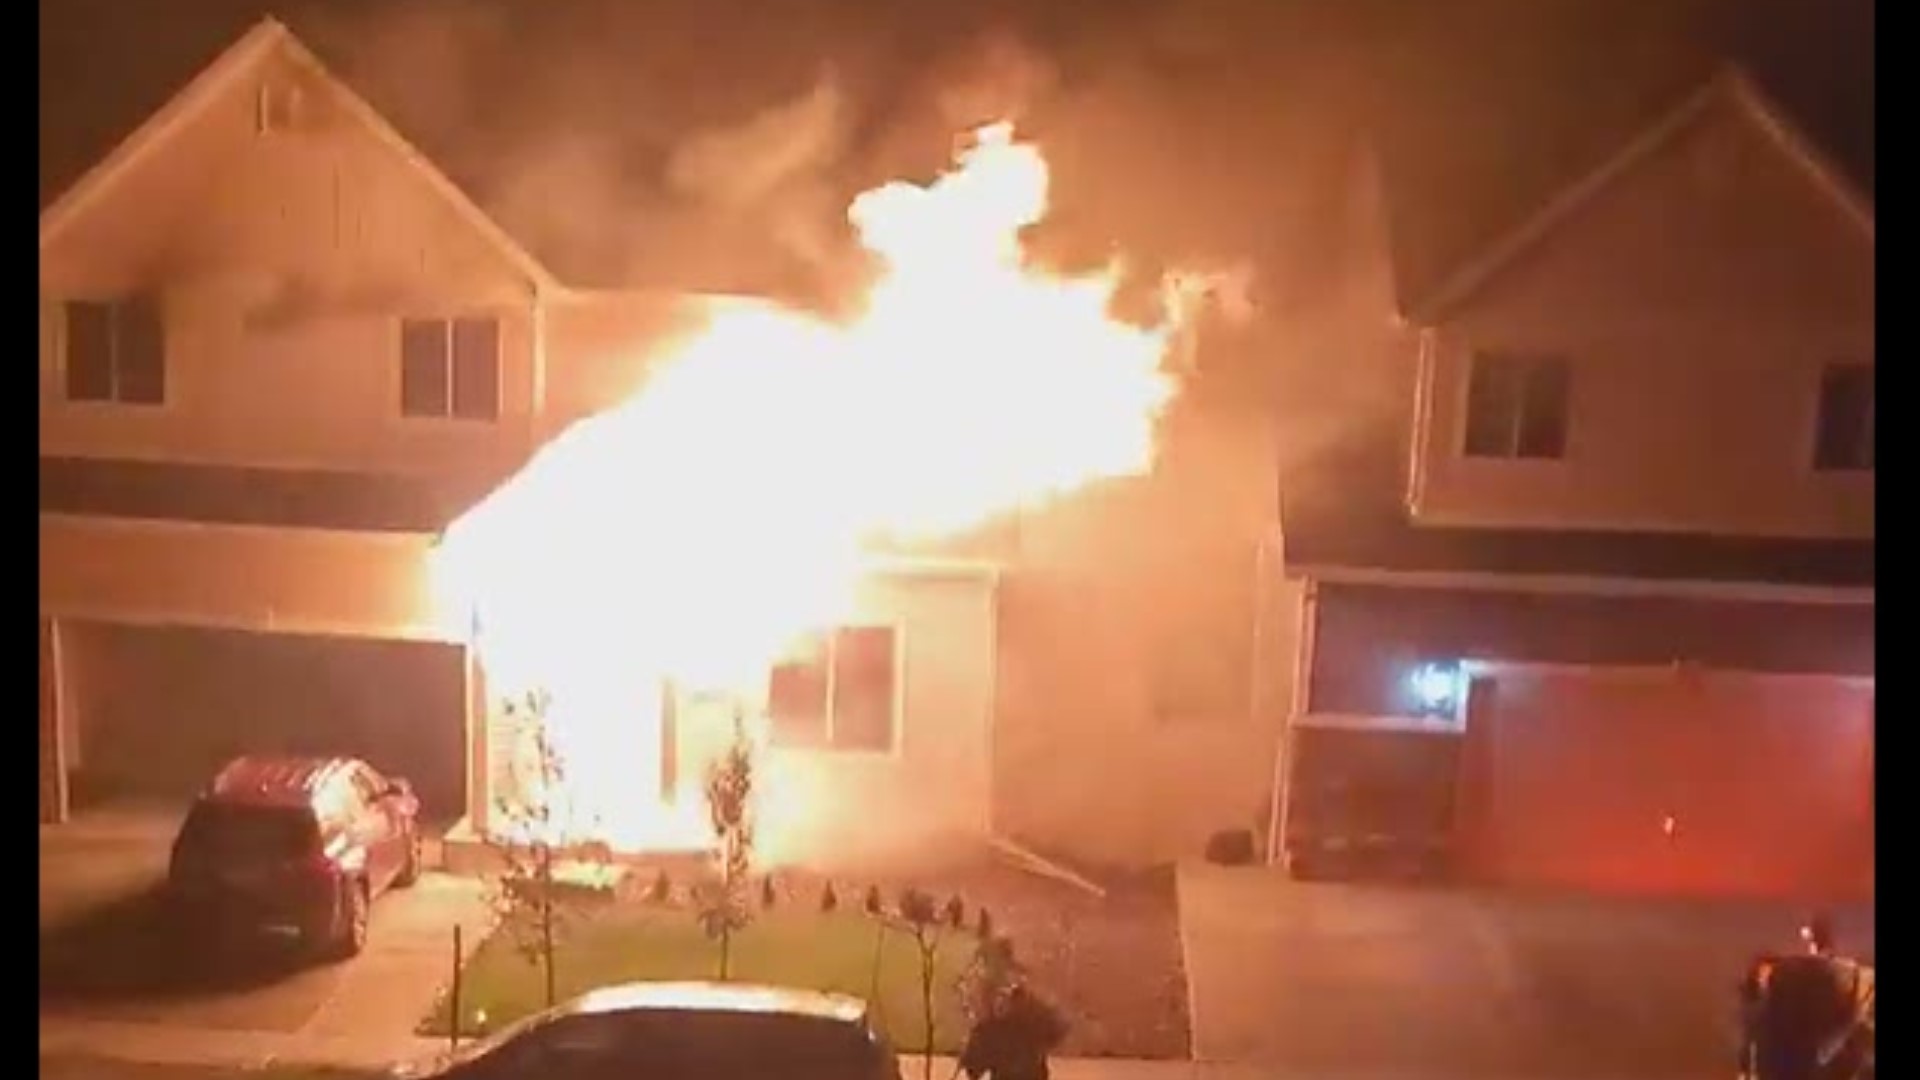 Neighbor Morice Sims-Herrick recorded this video of the fire on North Truckee Street in Denver early Wednesday morning.